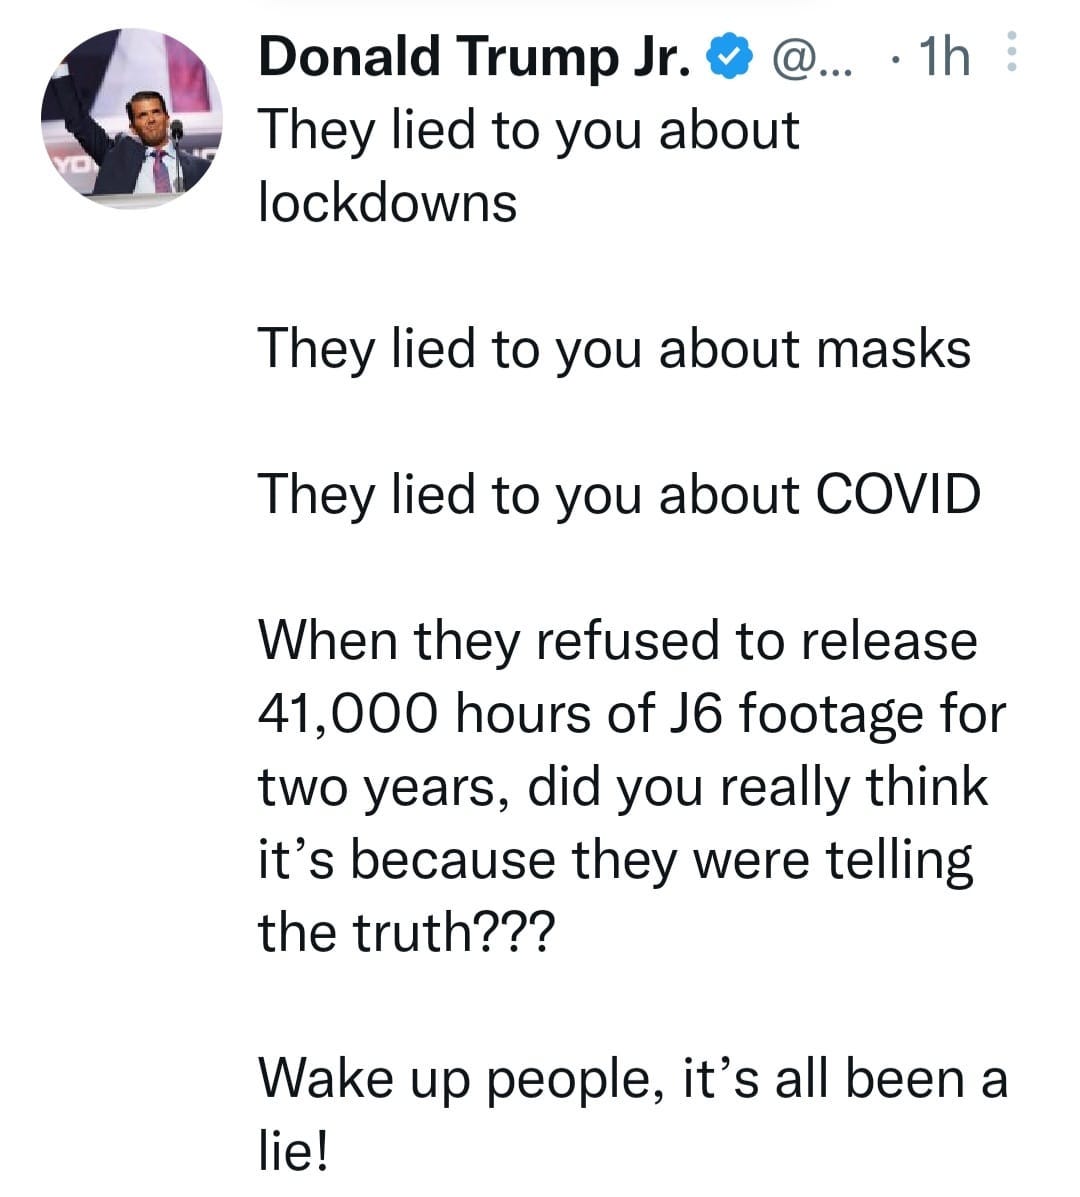 May be an image of 1 person and text that says 'Donald Trump Jr. They lied to you about lockdowns 1h They lied to you about masks They lied to you about COVID When they refused to release 41,000 hours of J6 footage for two years, did you really think it's because they were telling the truth??? Wake up people, it's all been a lie!'